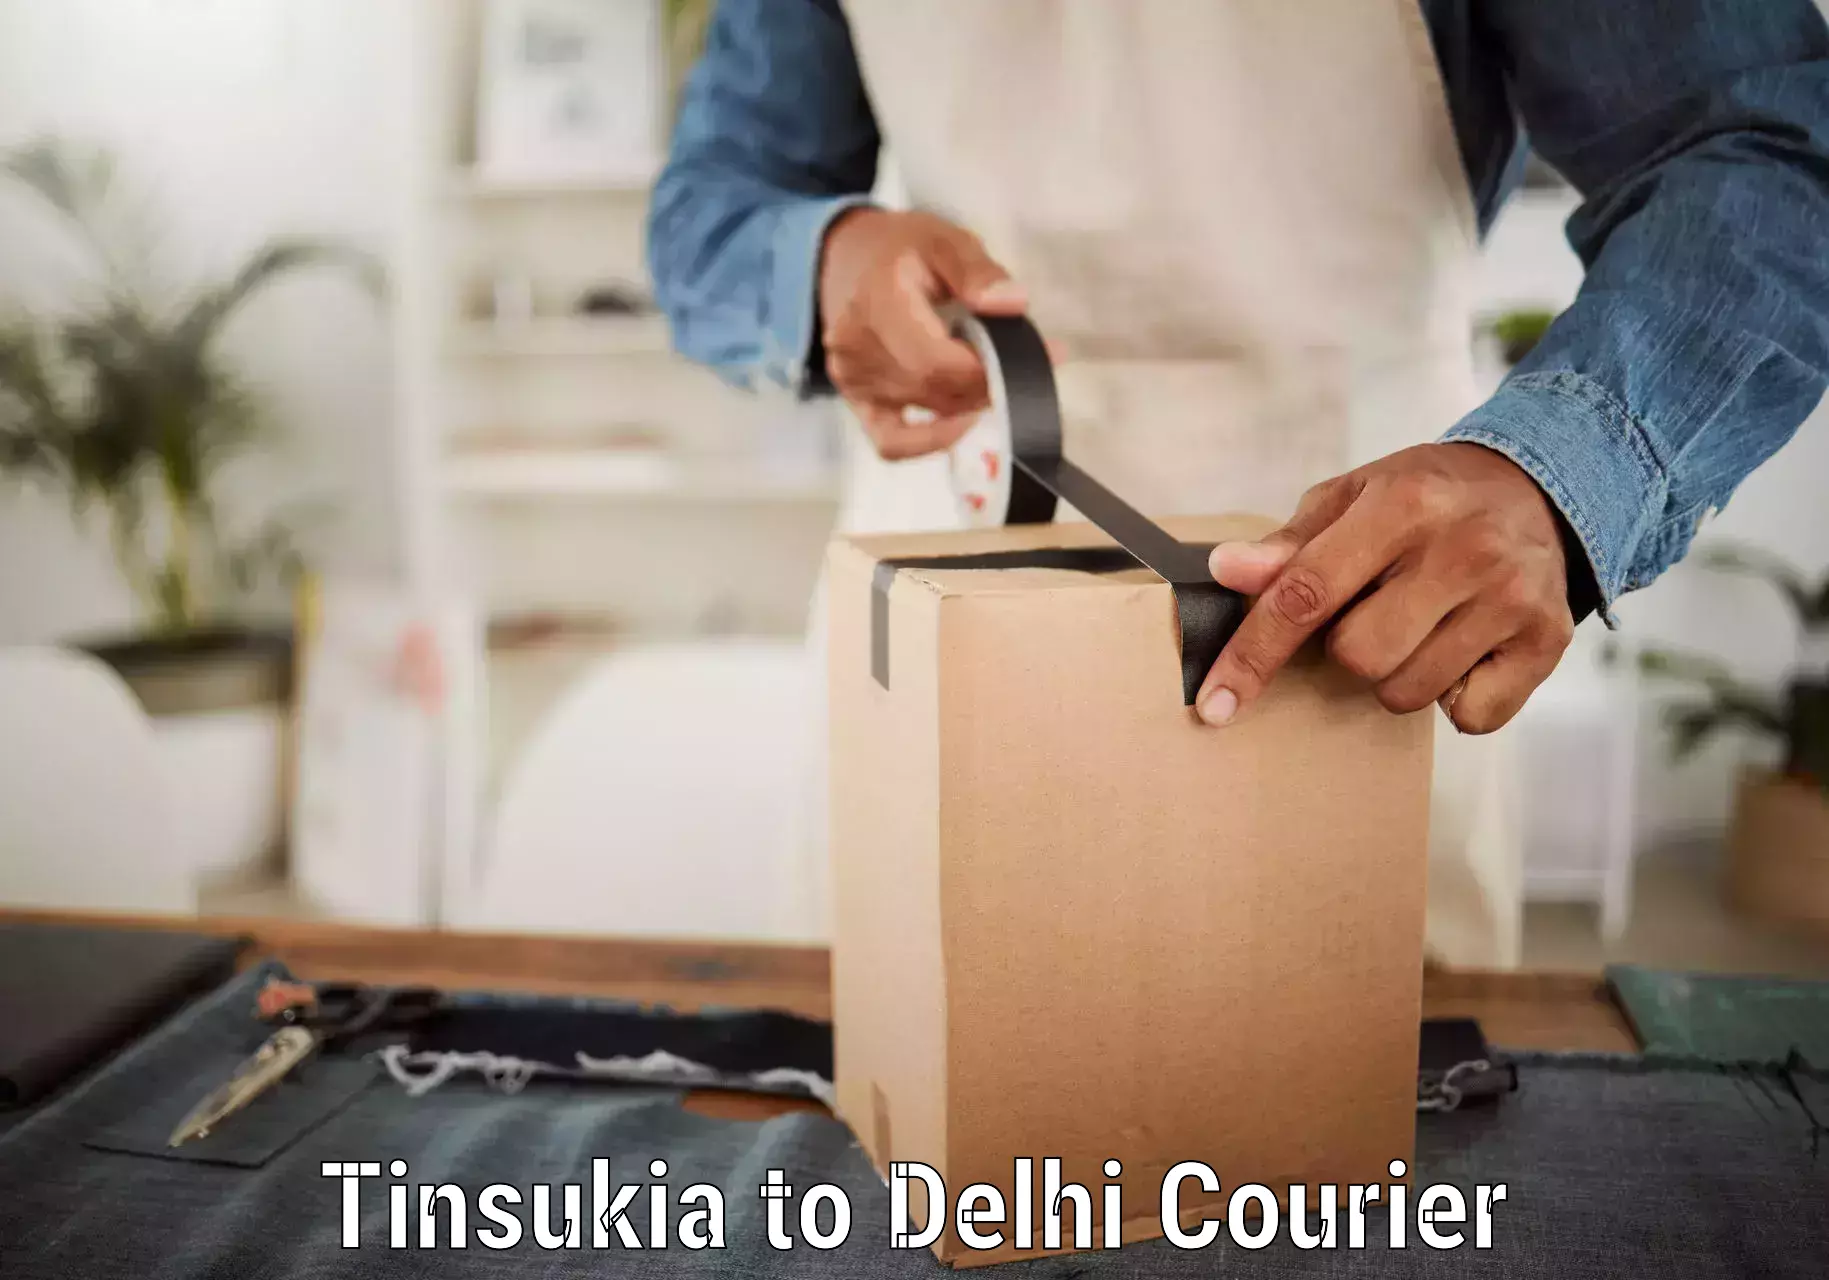 Flexible delivery scheduling Tinsukia to Delhi